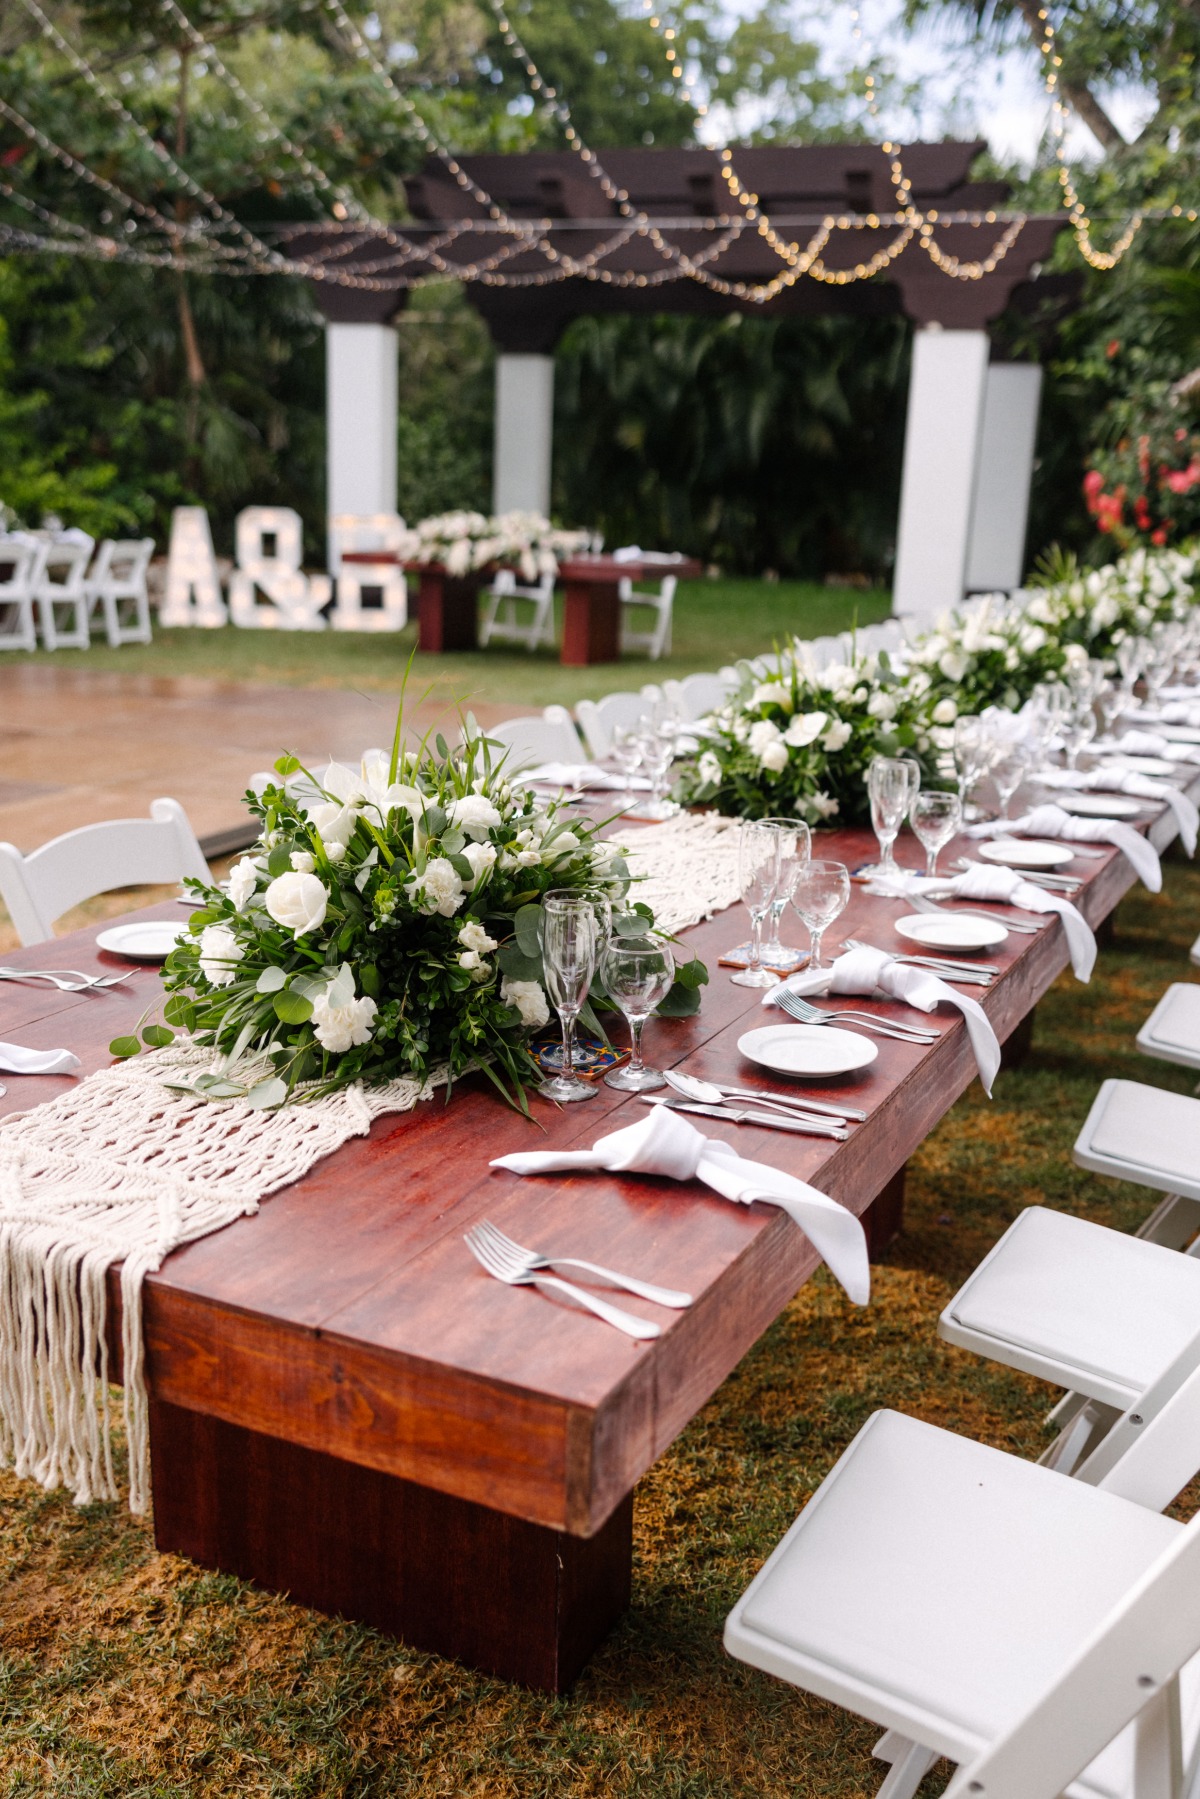 Reception table with white flowers and greenery